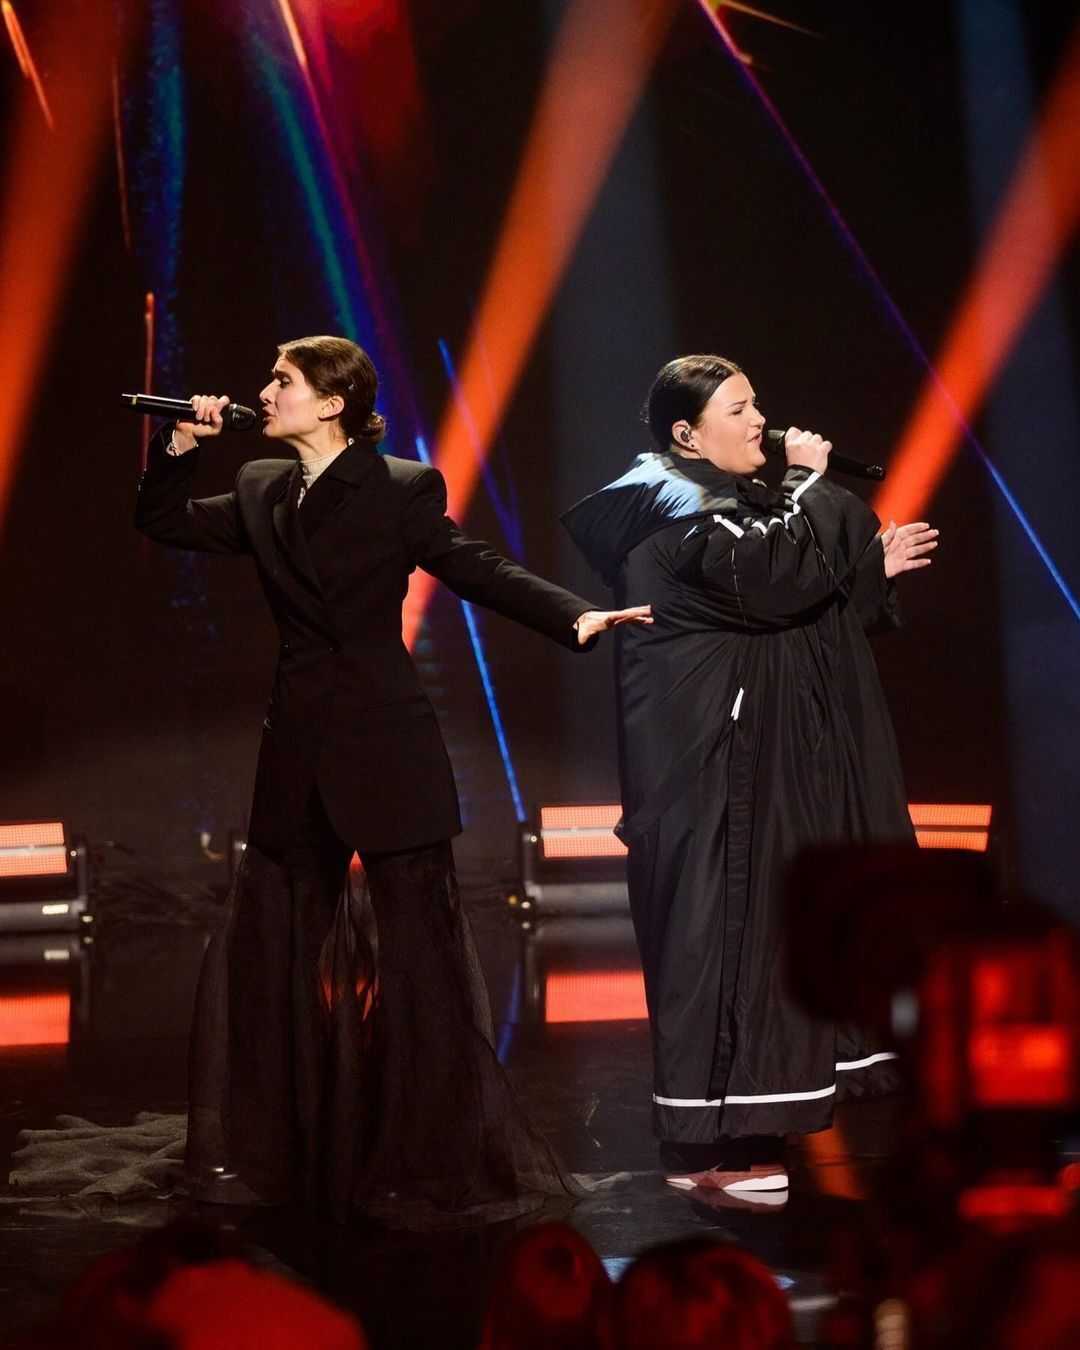 Stylist rated the looks of alyona alyona and Jerry Heil at the National Selection 2024 and gave advice for the main perfomance at the Eurovision: the raincoat looks out of place